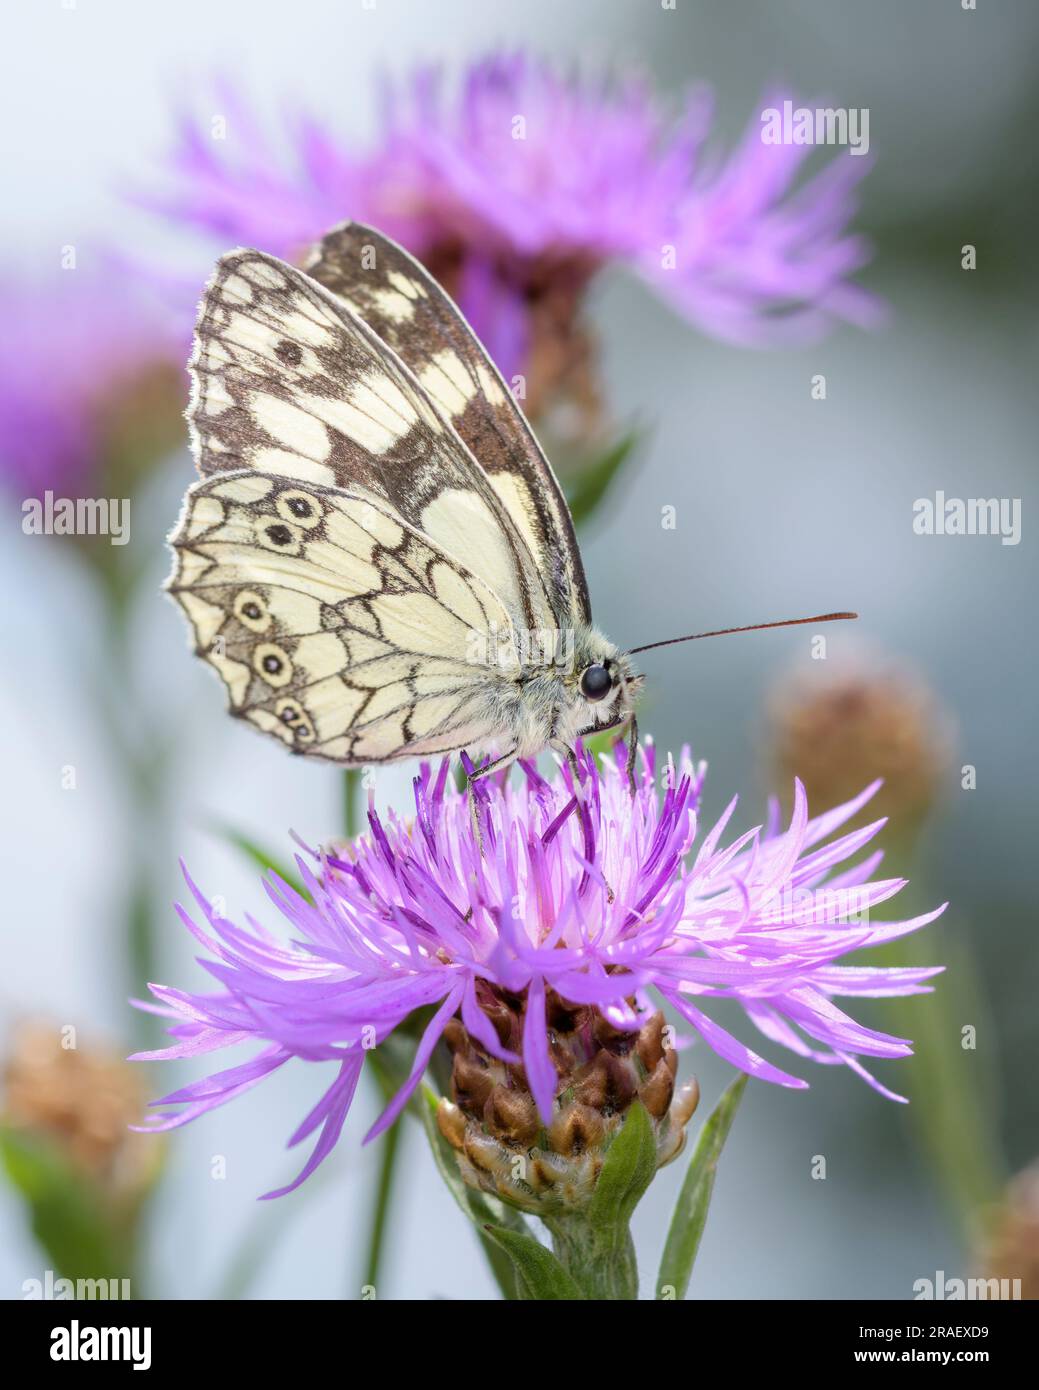 The marbled white - Melanargia galathea sucks nectar with its trunk from the blossom of the Centaurea jacea, the brown knapweed or brownray knapweed Stock Photo